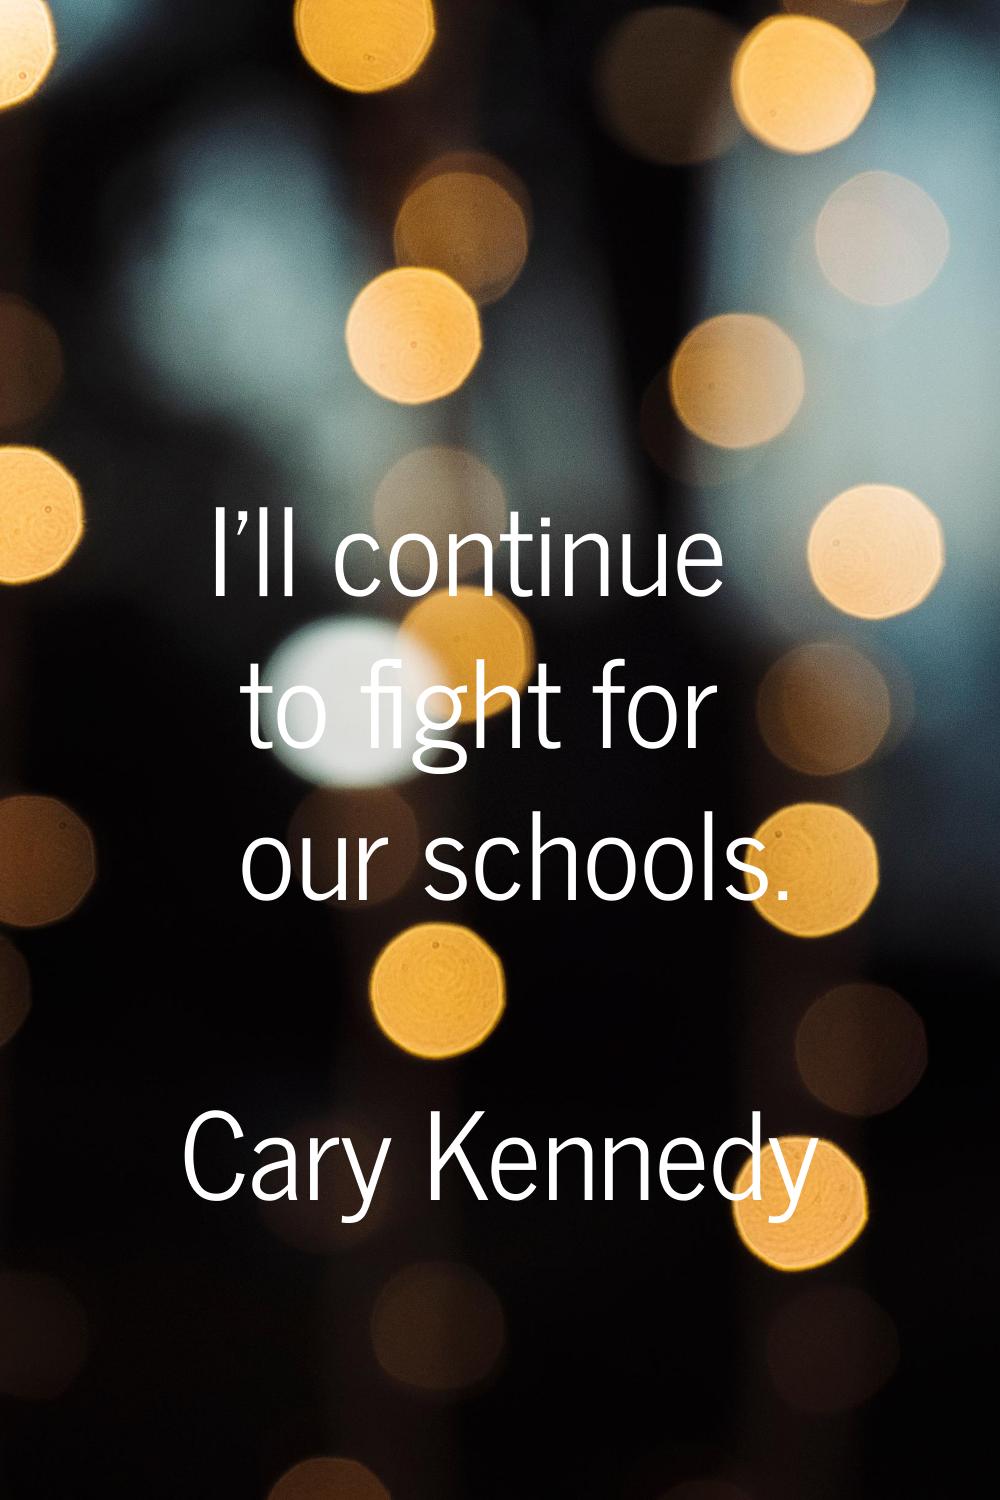 I'll continue to fight for our schools.